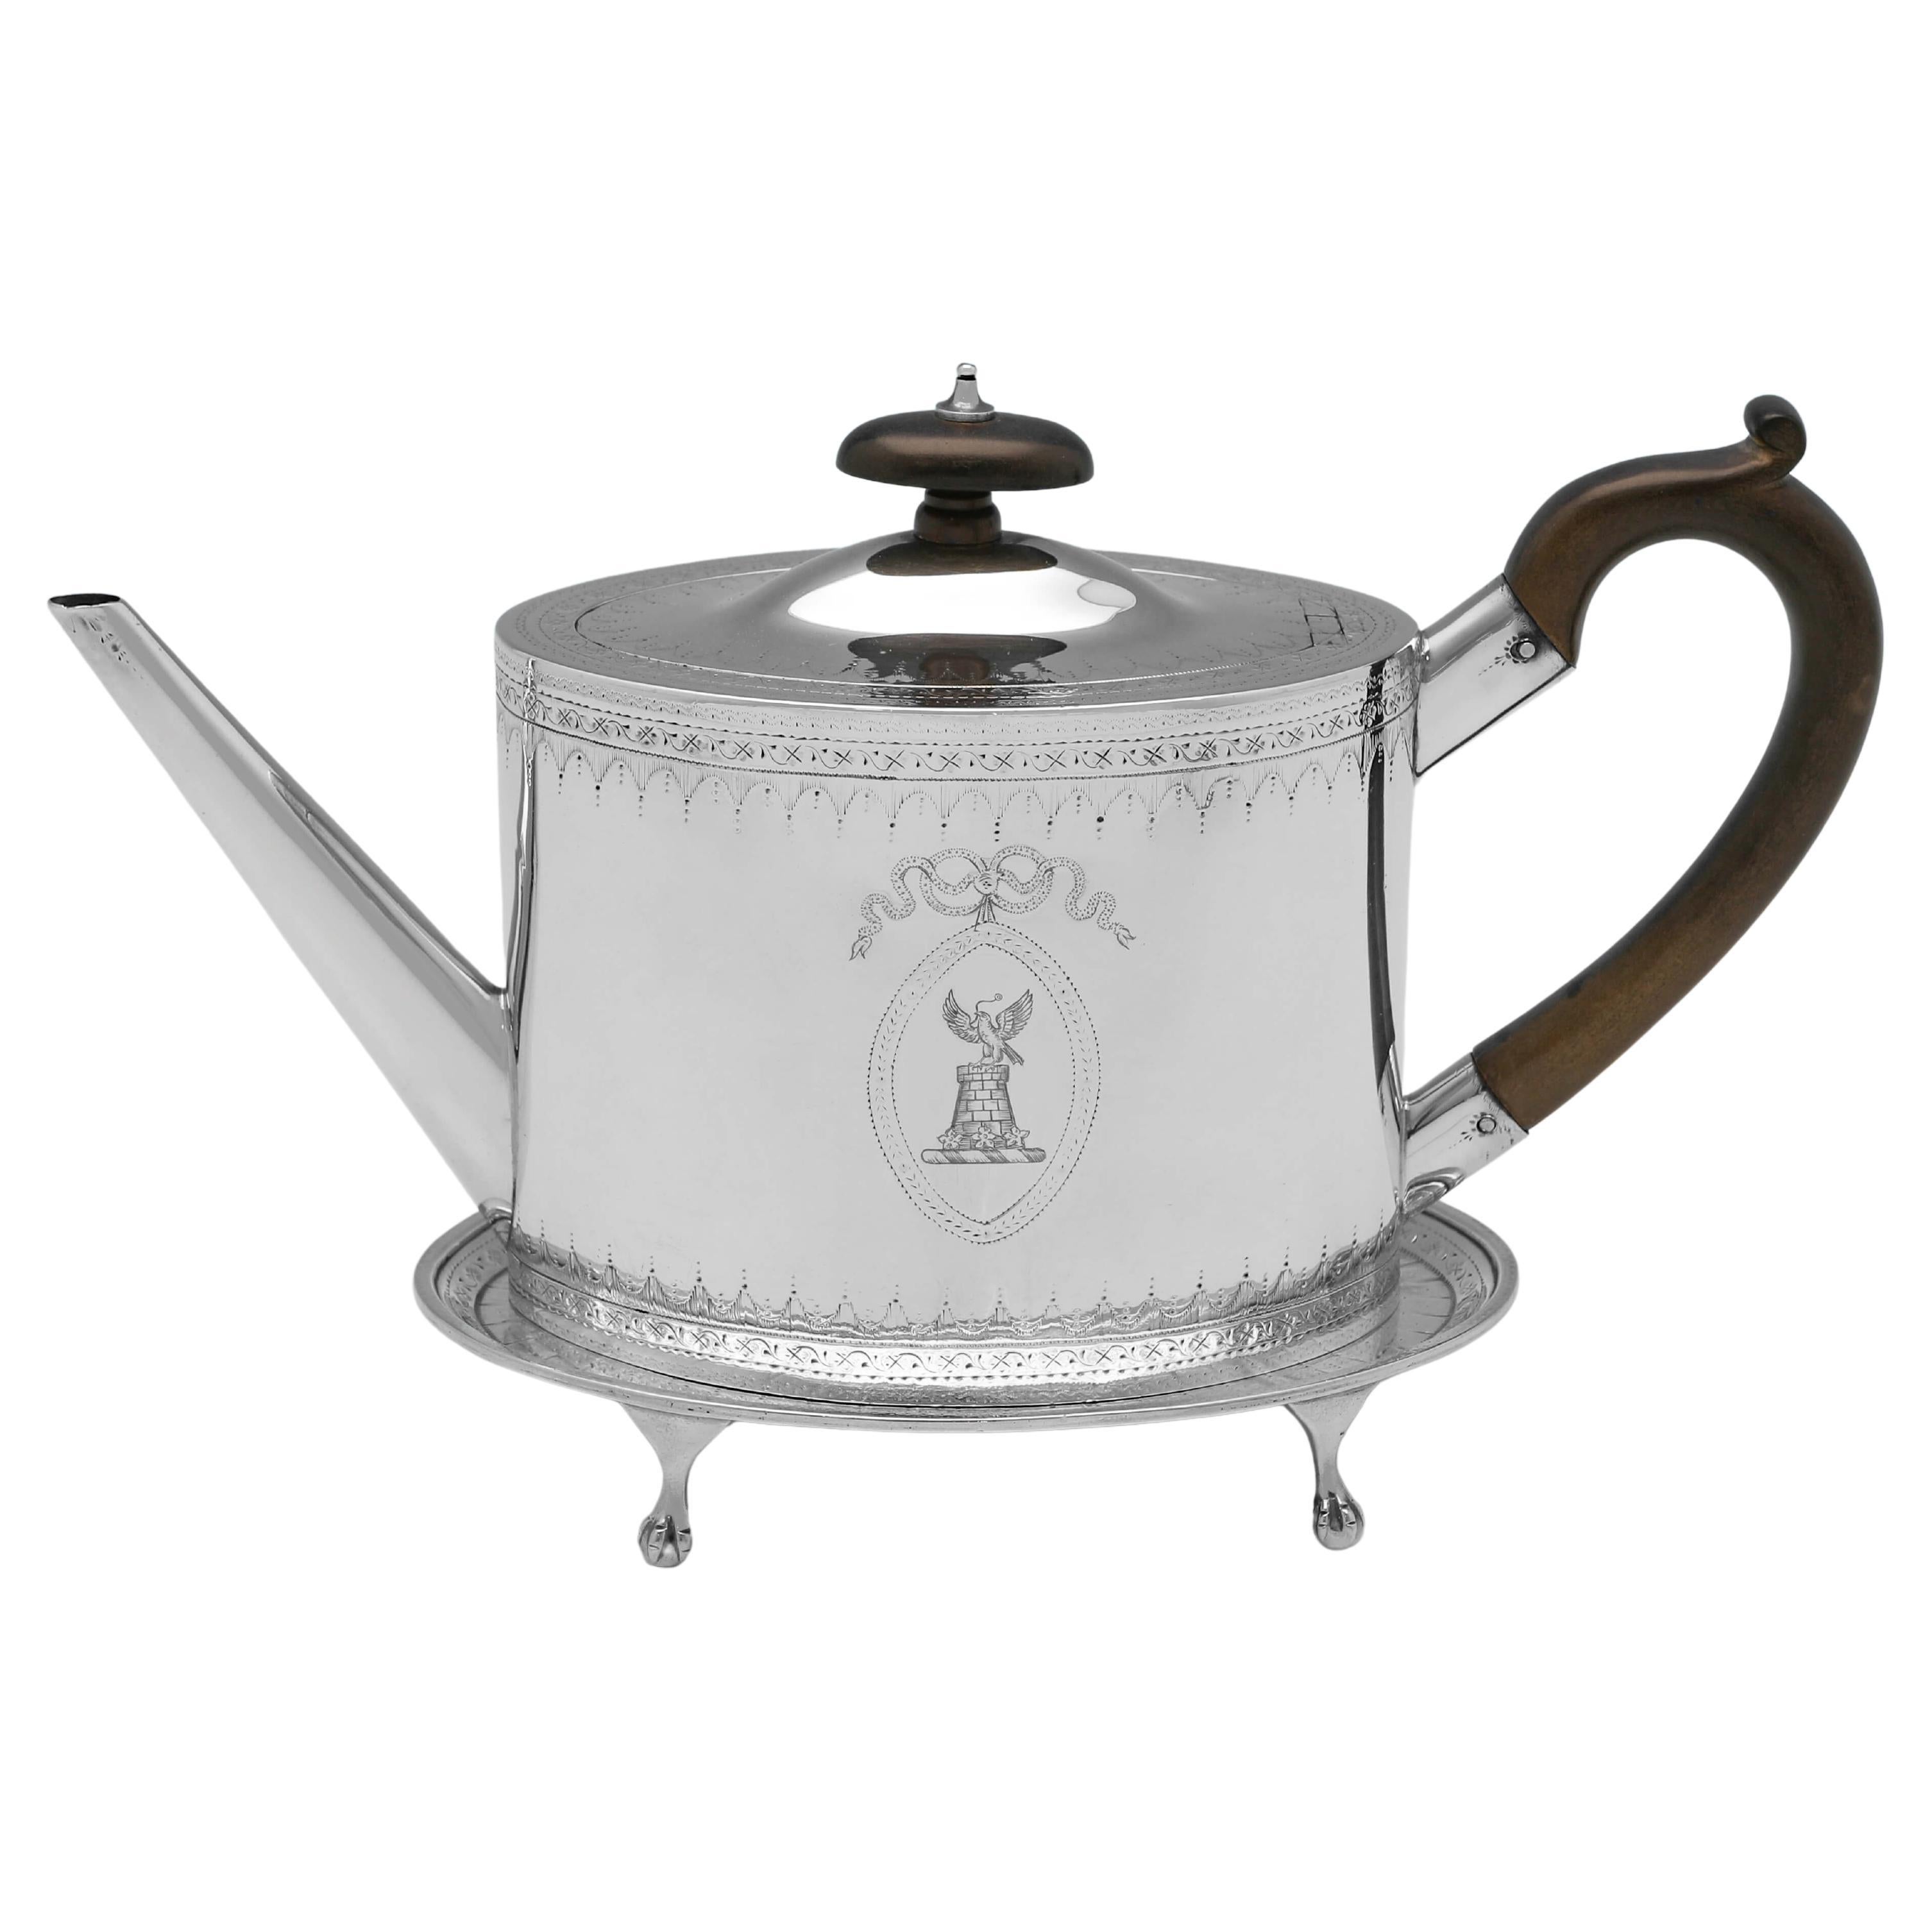 Neoclassical 18th Century Sterling Silver Teapot On Stand - John Denziloe 1787/8 For Sale